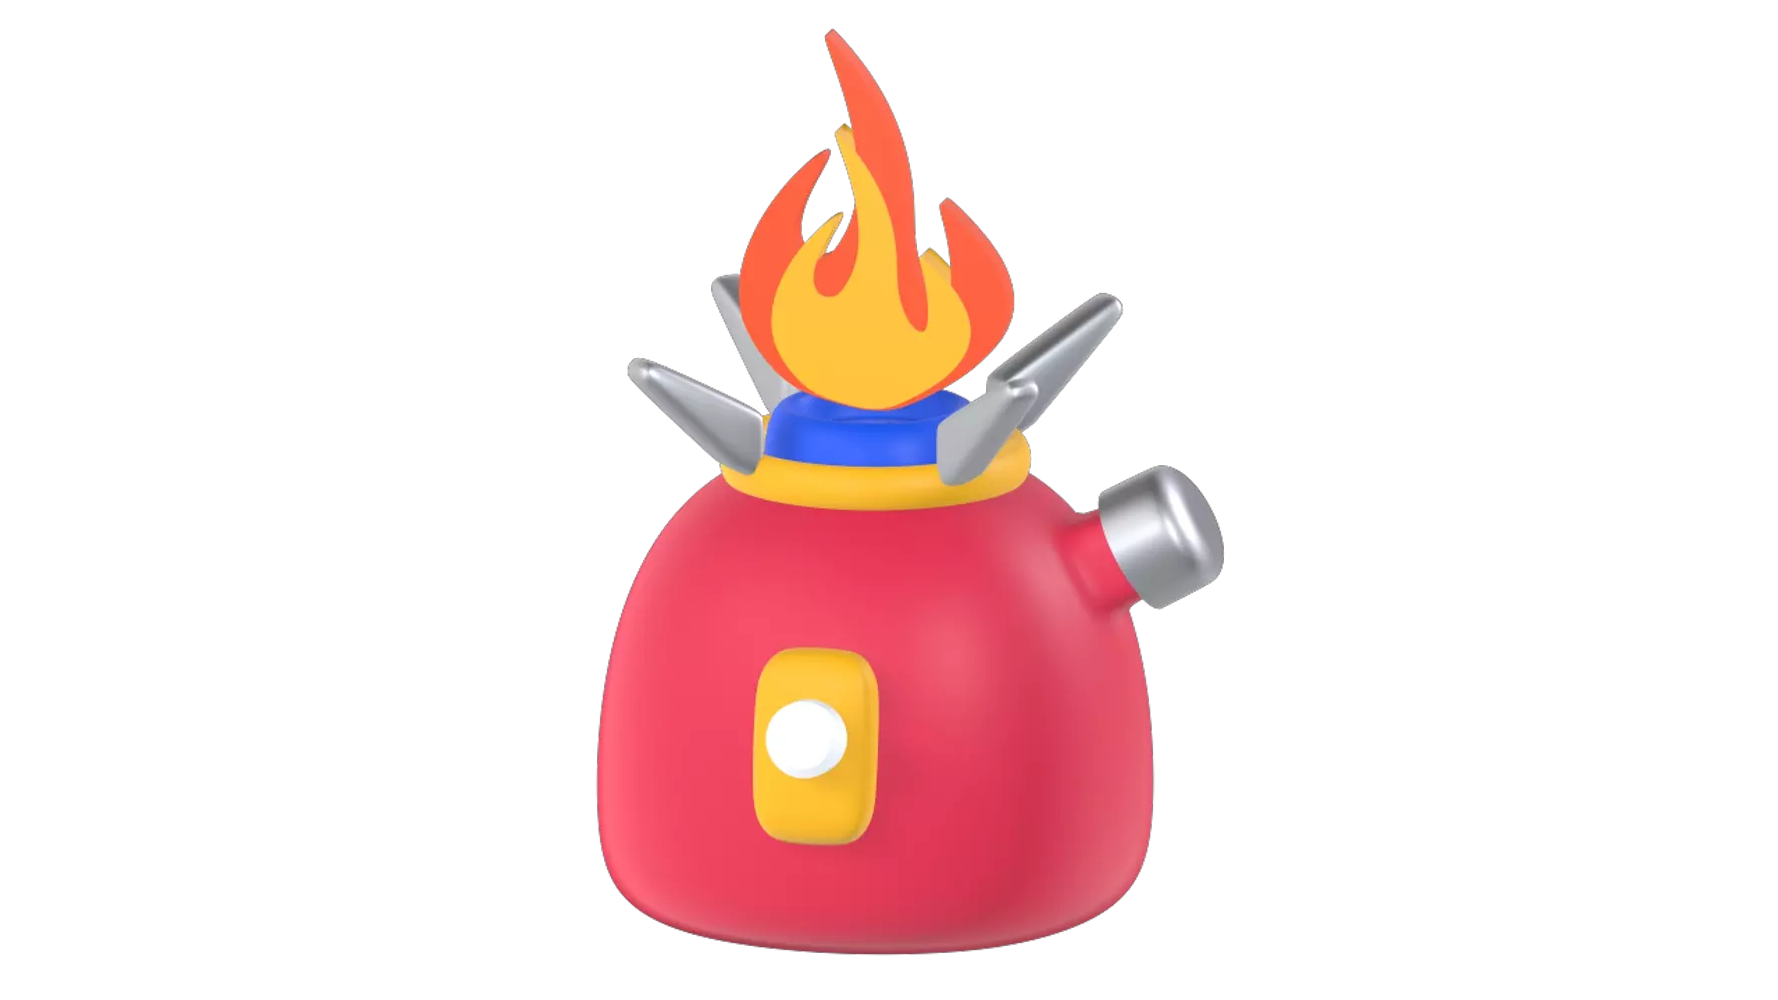 Camping Stove 3D Graphic